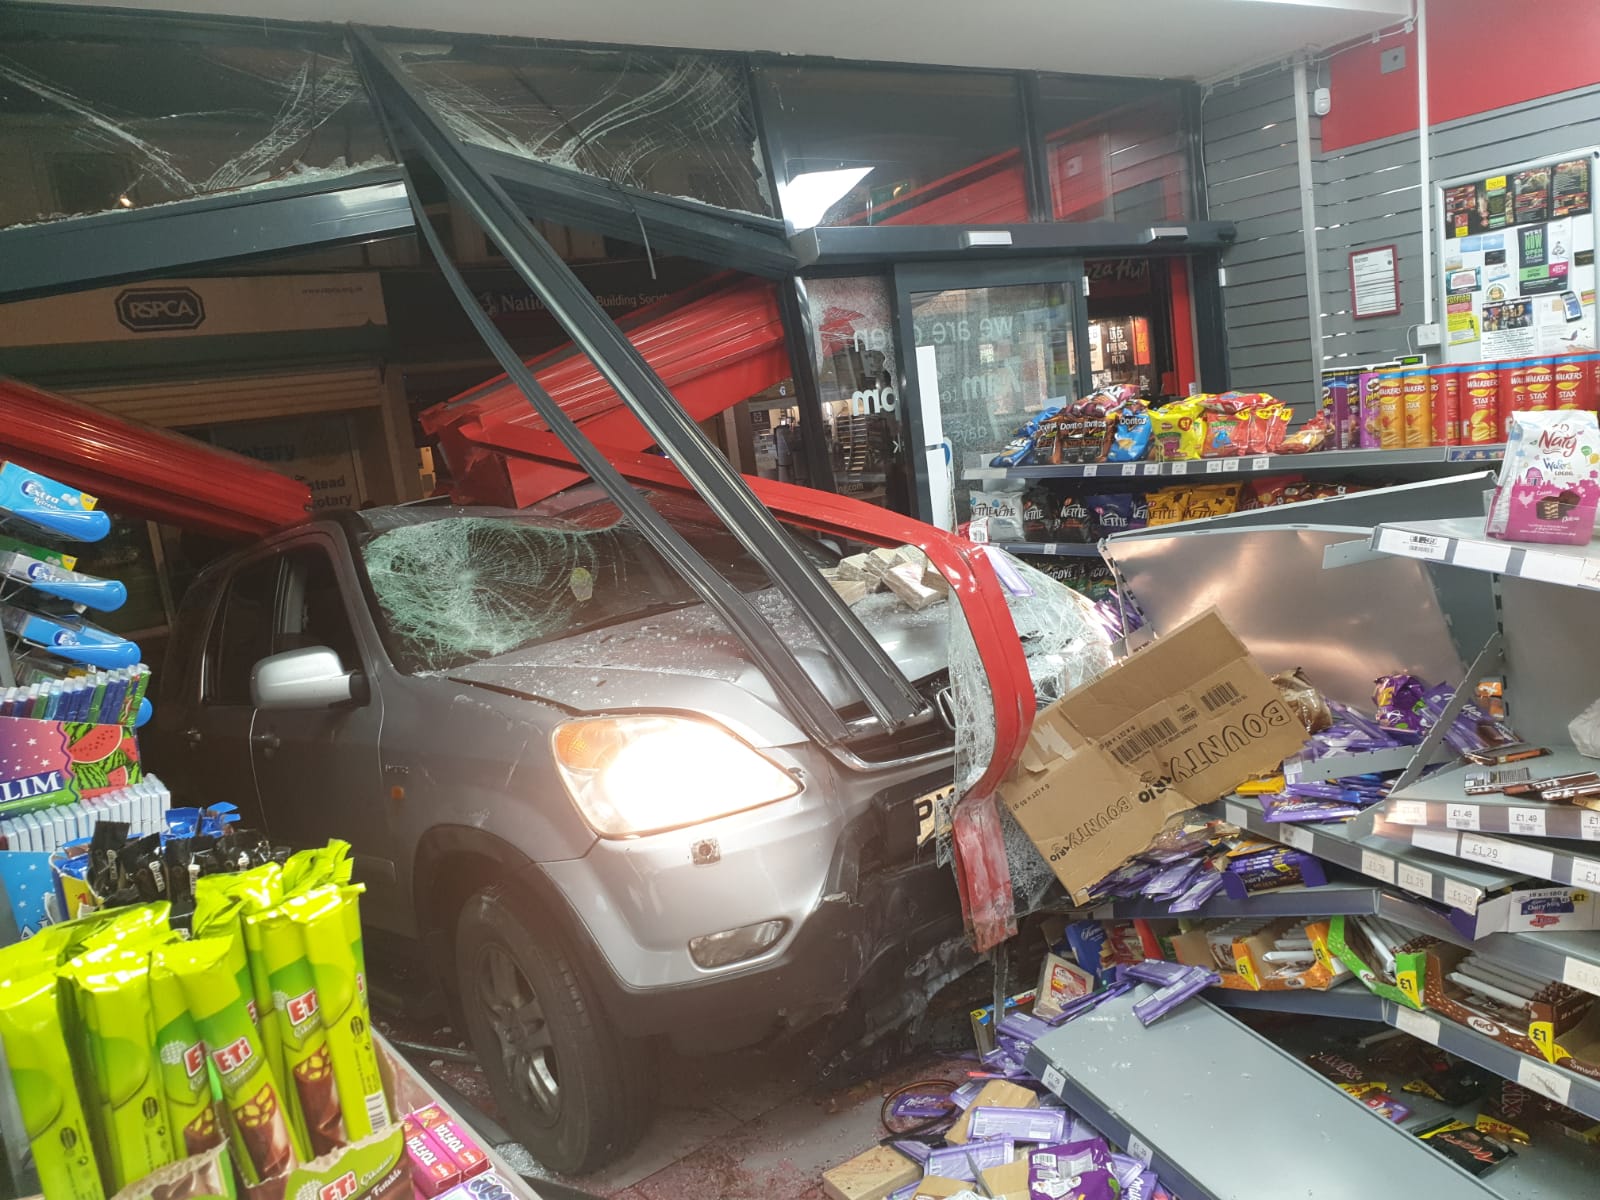 Car narrowly misses shoppers as it crashes into store in East Grinstead